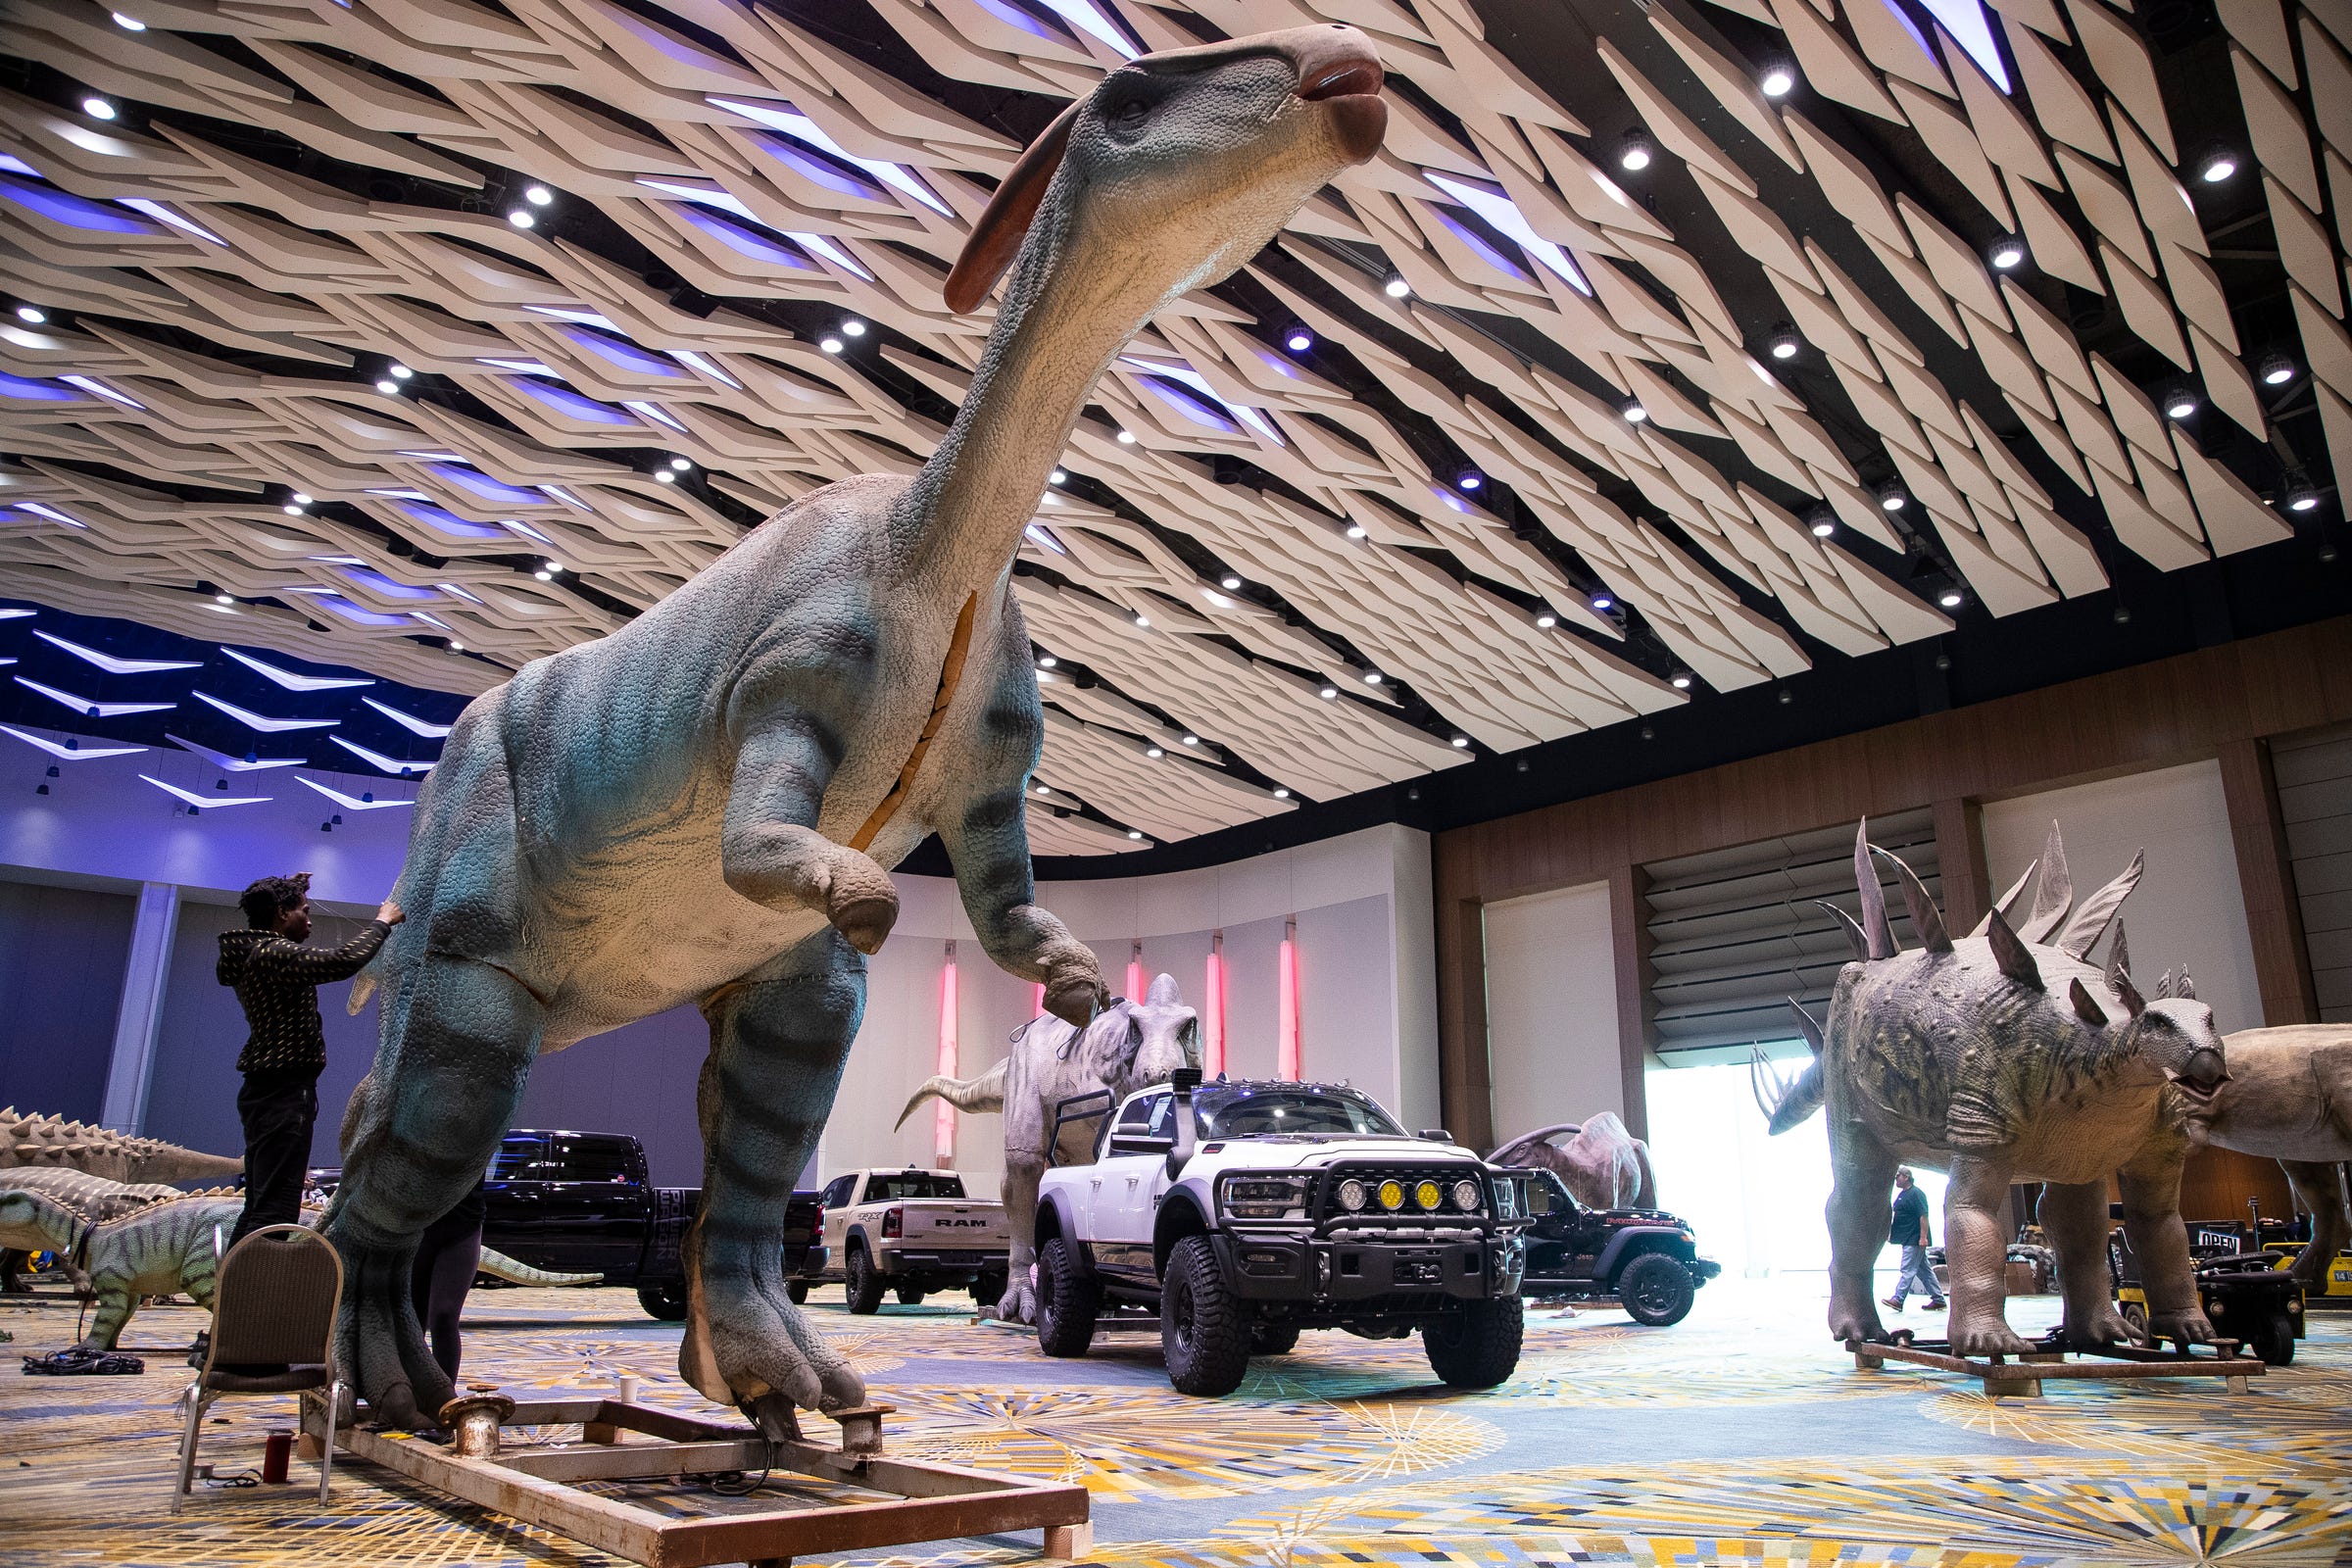 Kenny Thomas sews a dinosaur together as staff prepare for the Dinosaur and Off-Road Vehicle Encounter during the 2022 North American International Auto Show held at Huntington Place in downtown Detroit on Thursday, Sept. 15, 2022. The interactive exhibition shows off more than 80 large size dinosaurs.